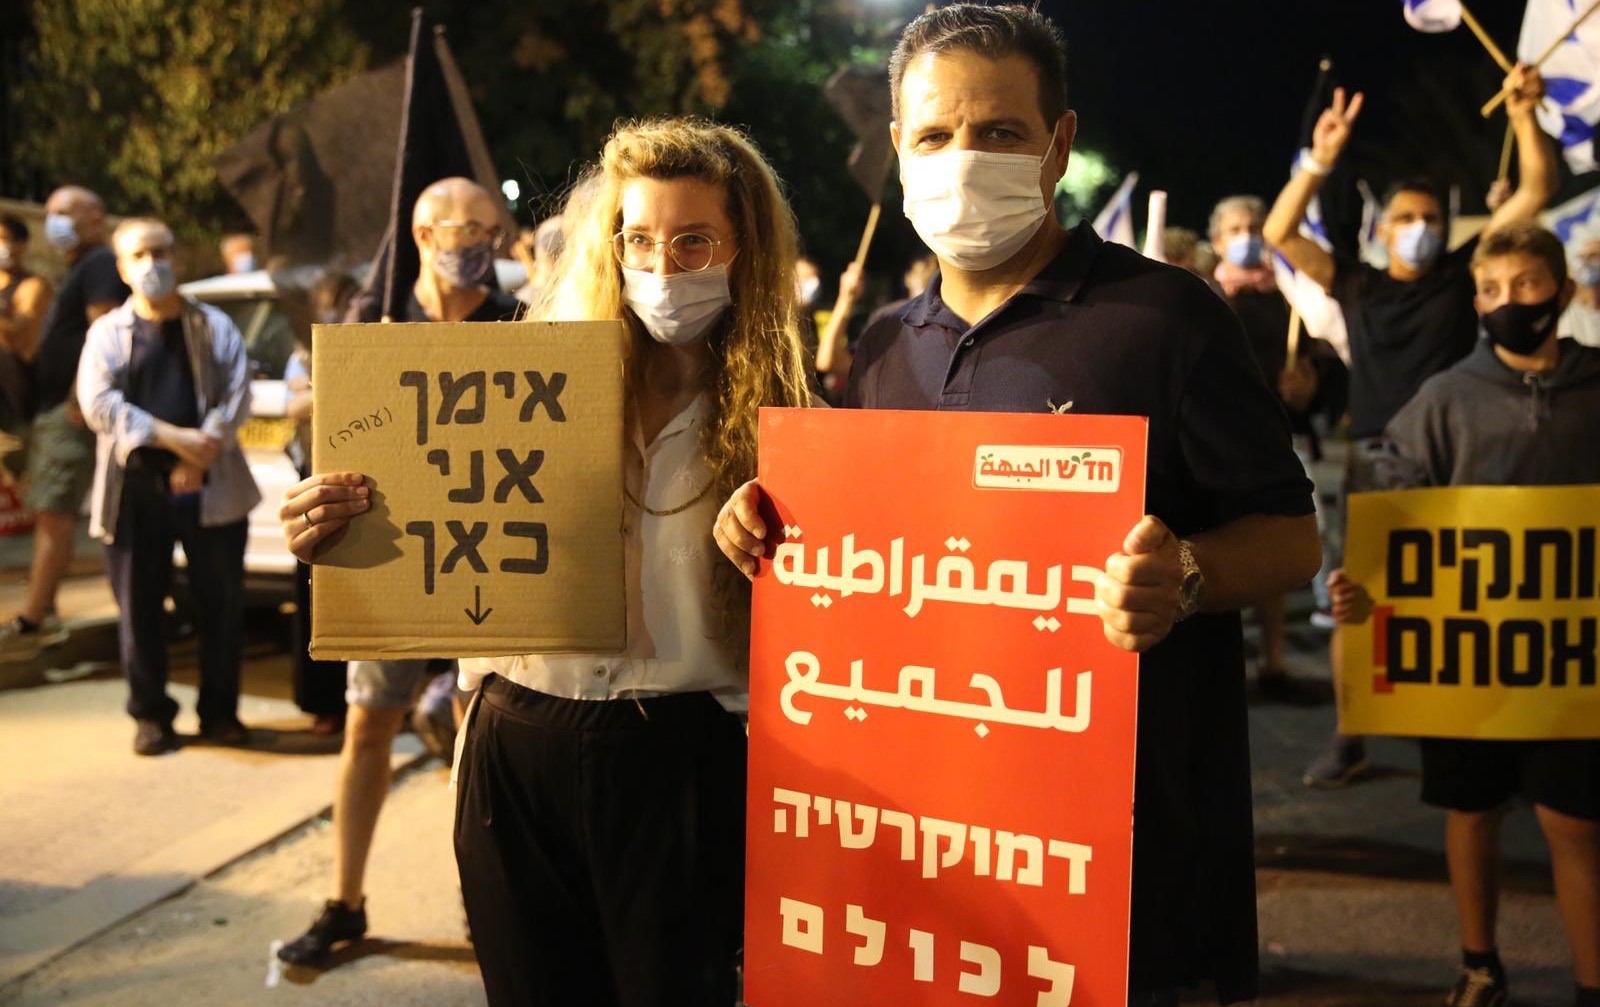 MK Ayman Odeh holds a Hadash placard that reads in Arabic and Hebrew "Democracy for all" during the anti-government protest in Paris Square, near the PM’s official residence, on Saturday night, August 22. The women protester next to Odeh holds a sign in Hebrew reading "Ayman, I'm here."